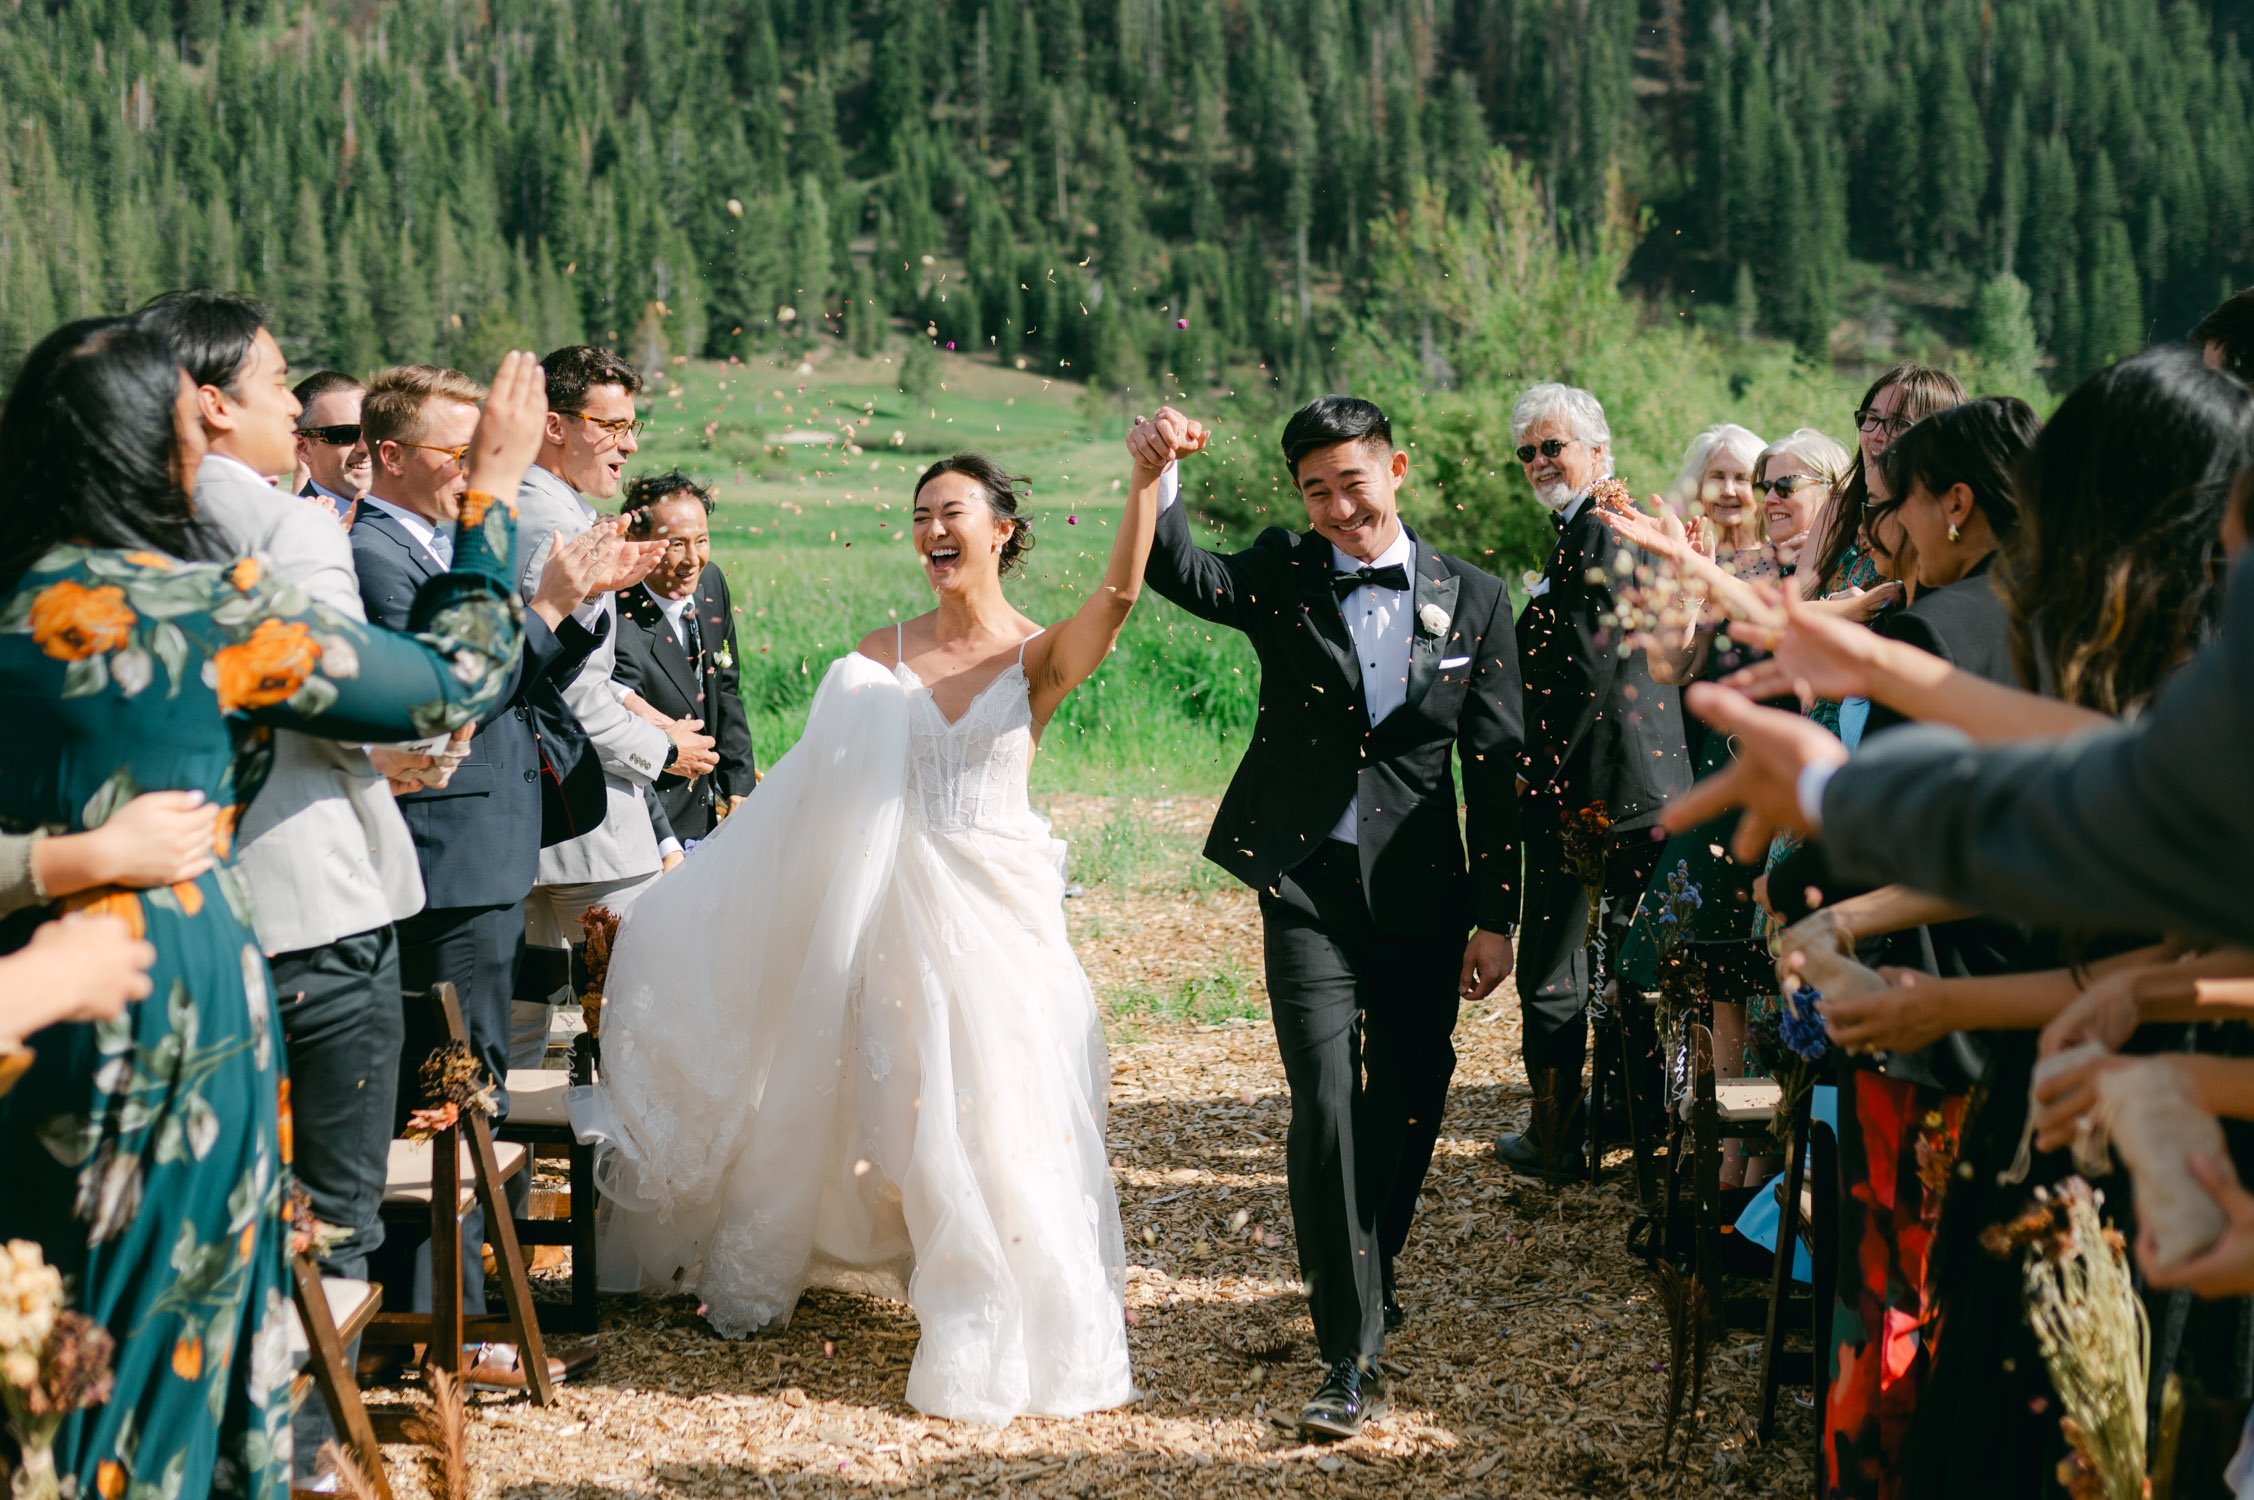 olympic valley stables wedding, photo of a newly wed couple during the confetti shower after their wedding ceremony